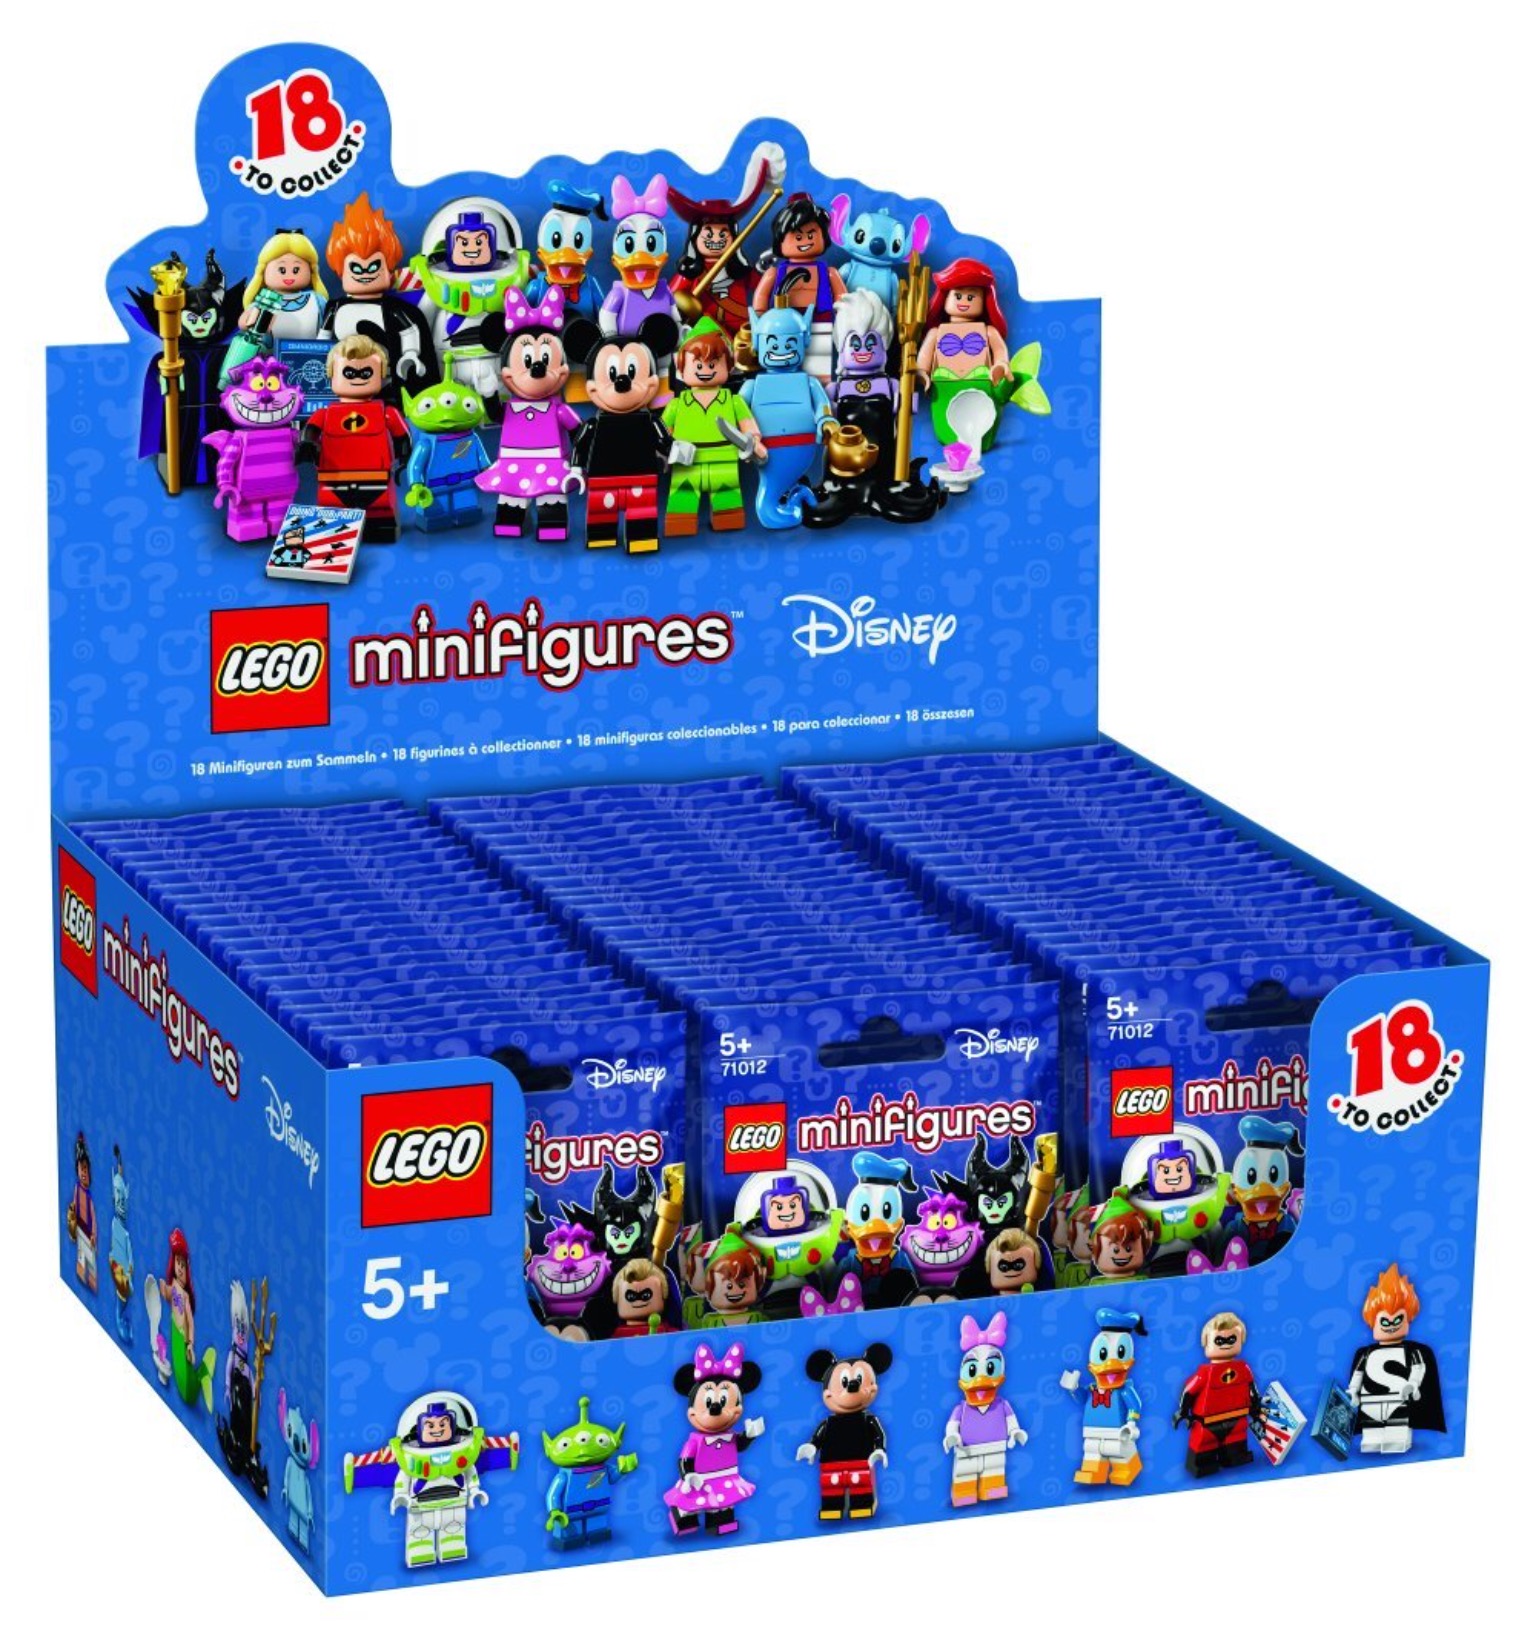 LEGO Disney 100 Minifigures Full Box Contents and Distribution